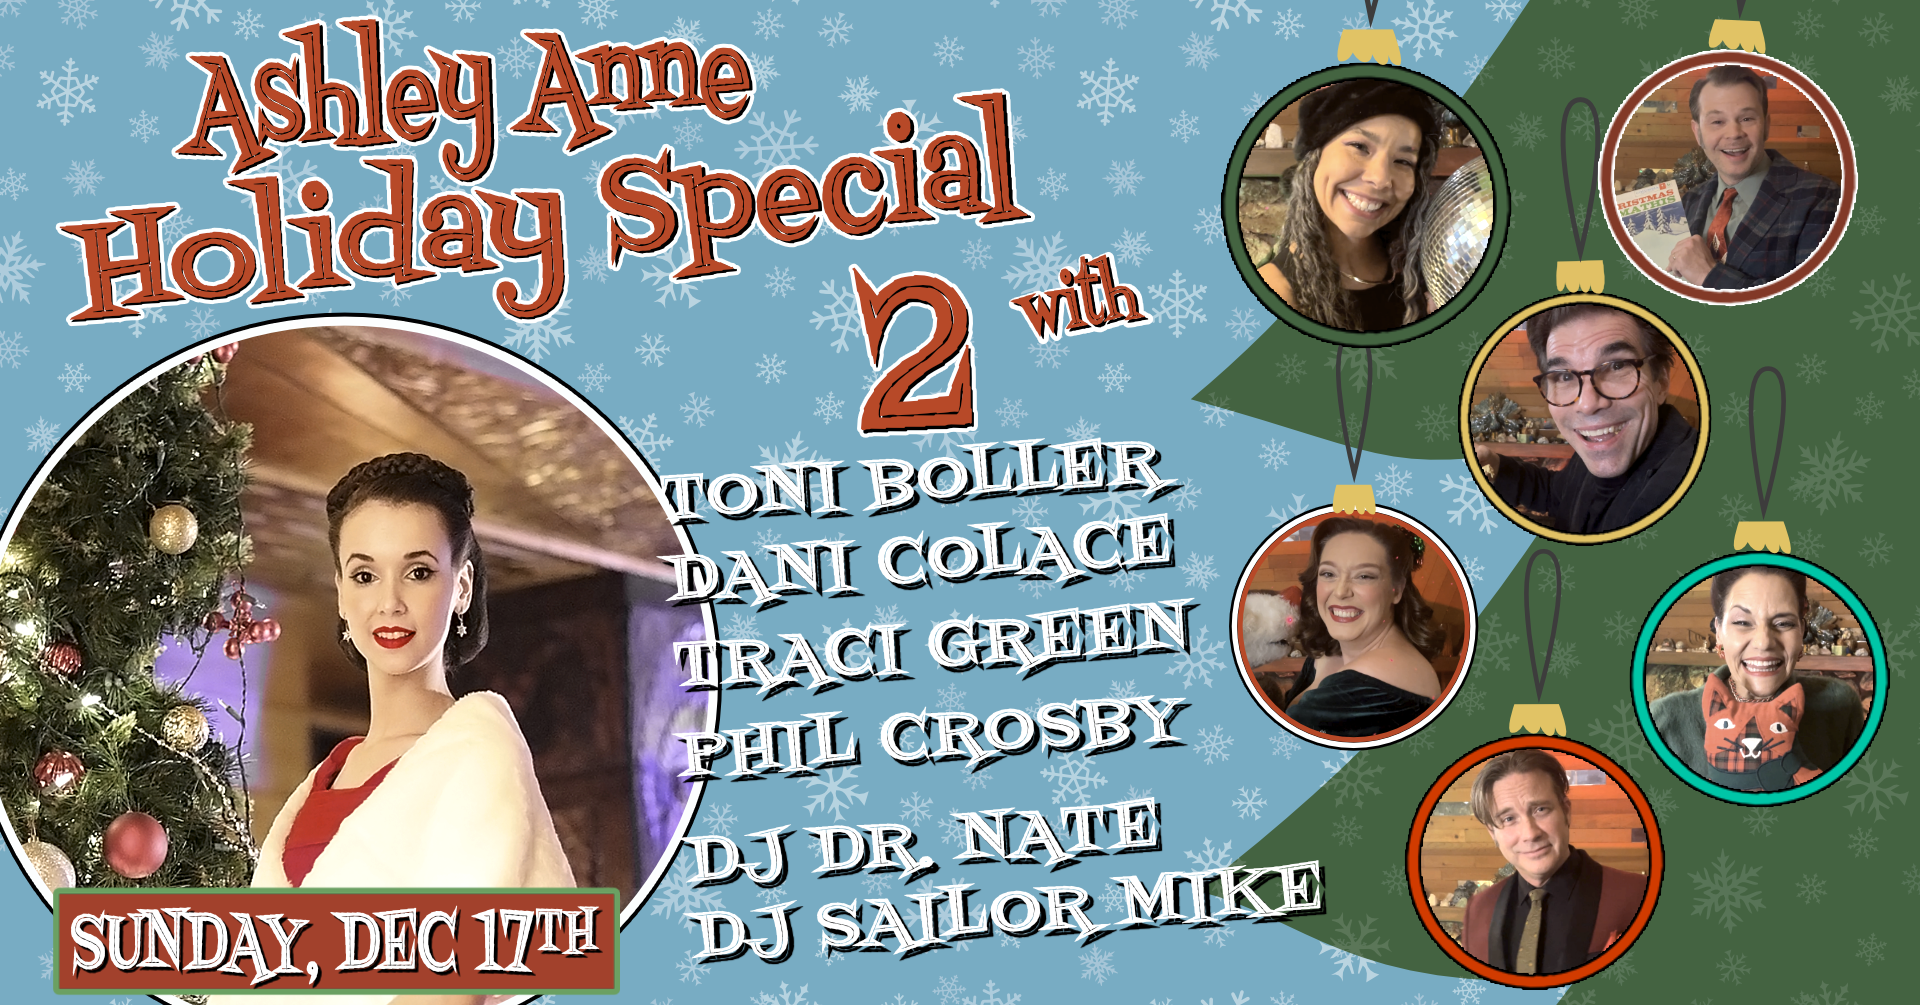 A VERY ASHLEY ANNE HOLIDAY SPECIAL 2 with TONI BOLLER, DANI COLACE, TRACI GREEN and PHIL CROSBY